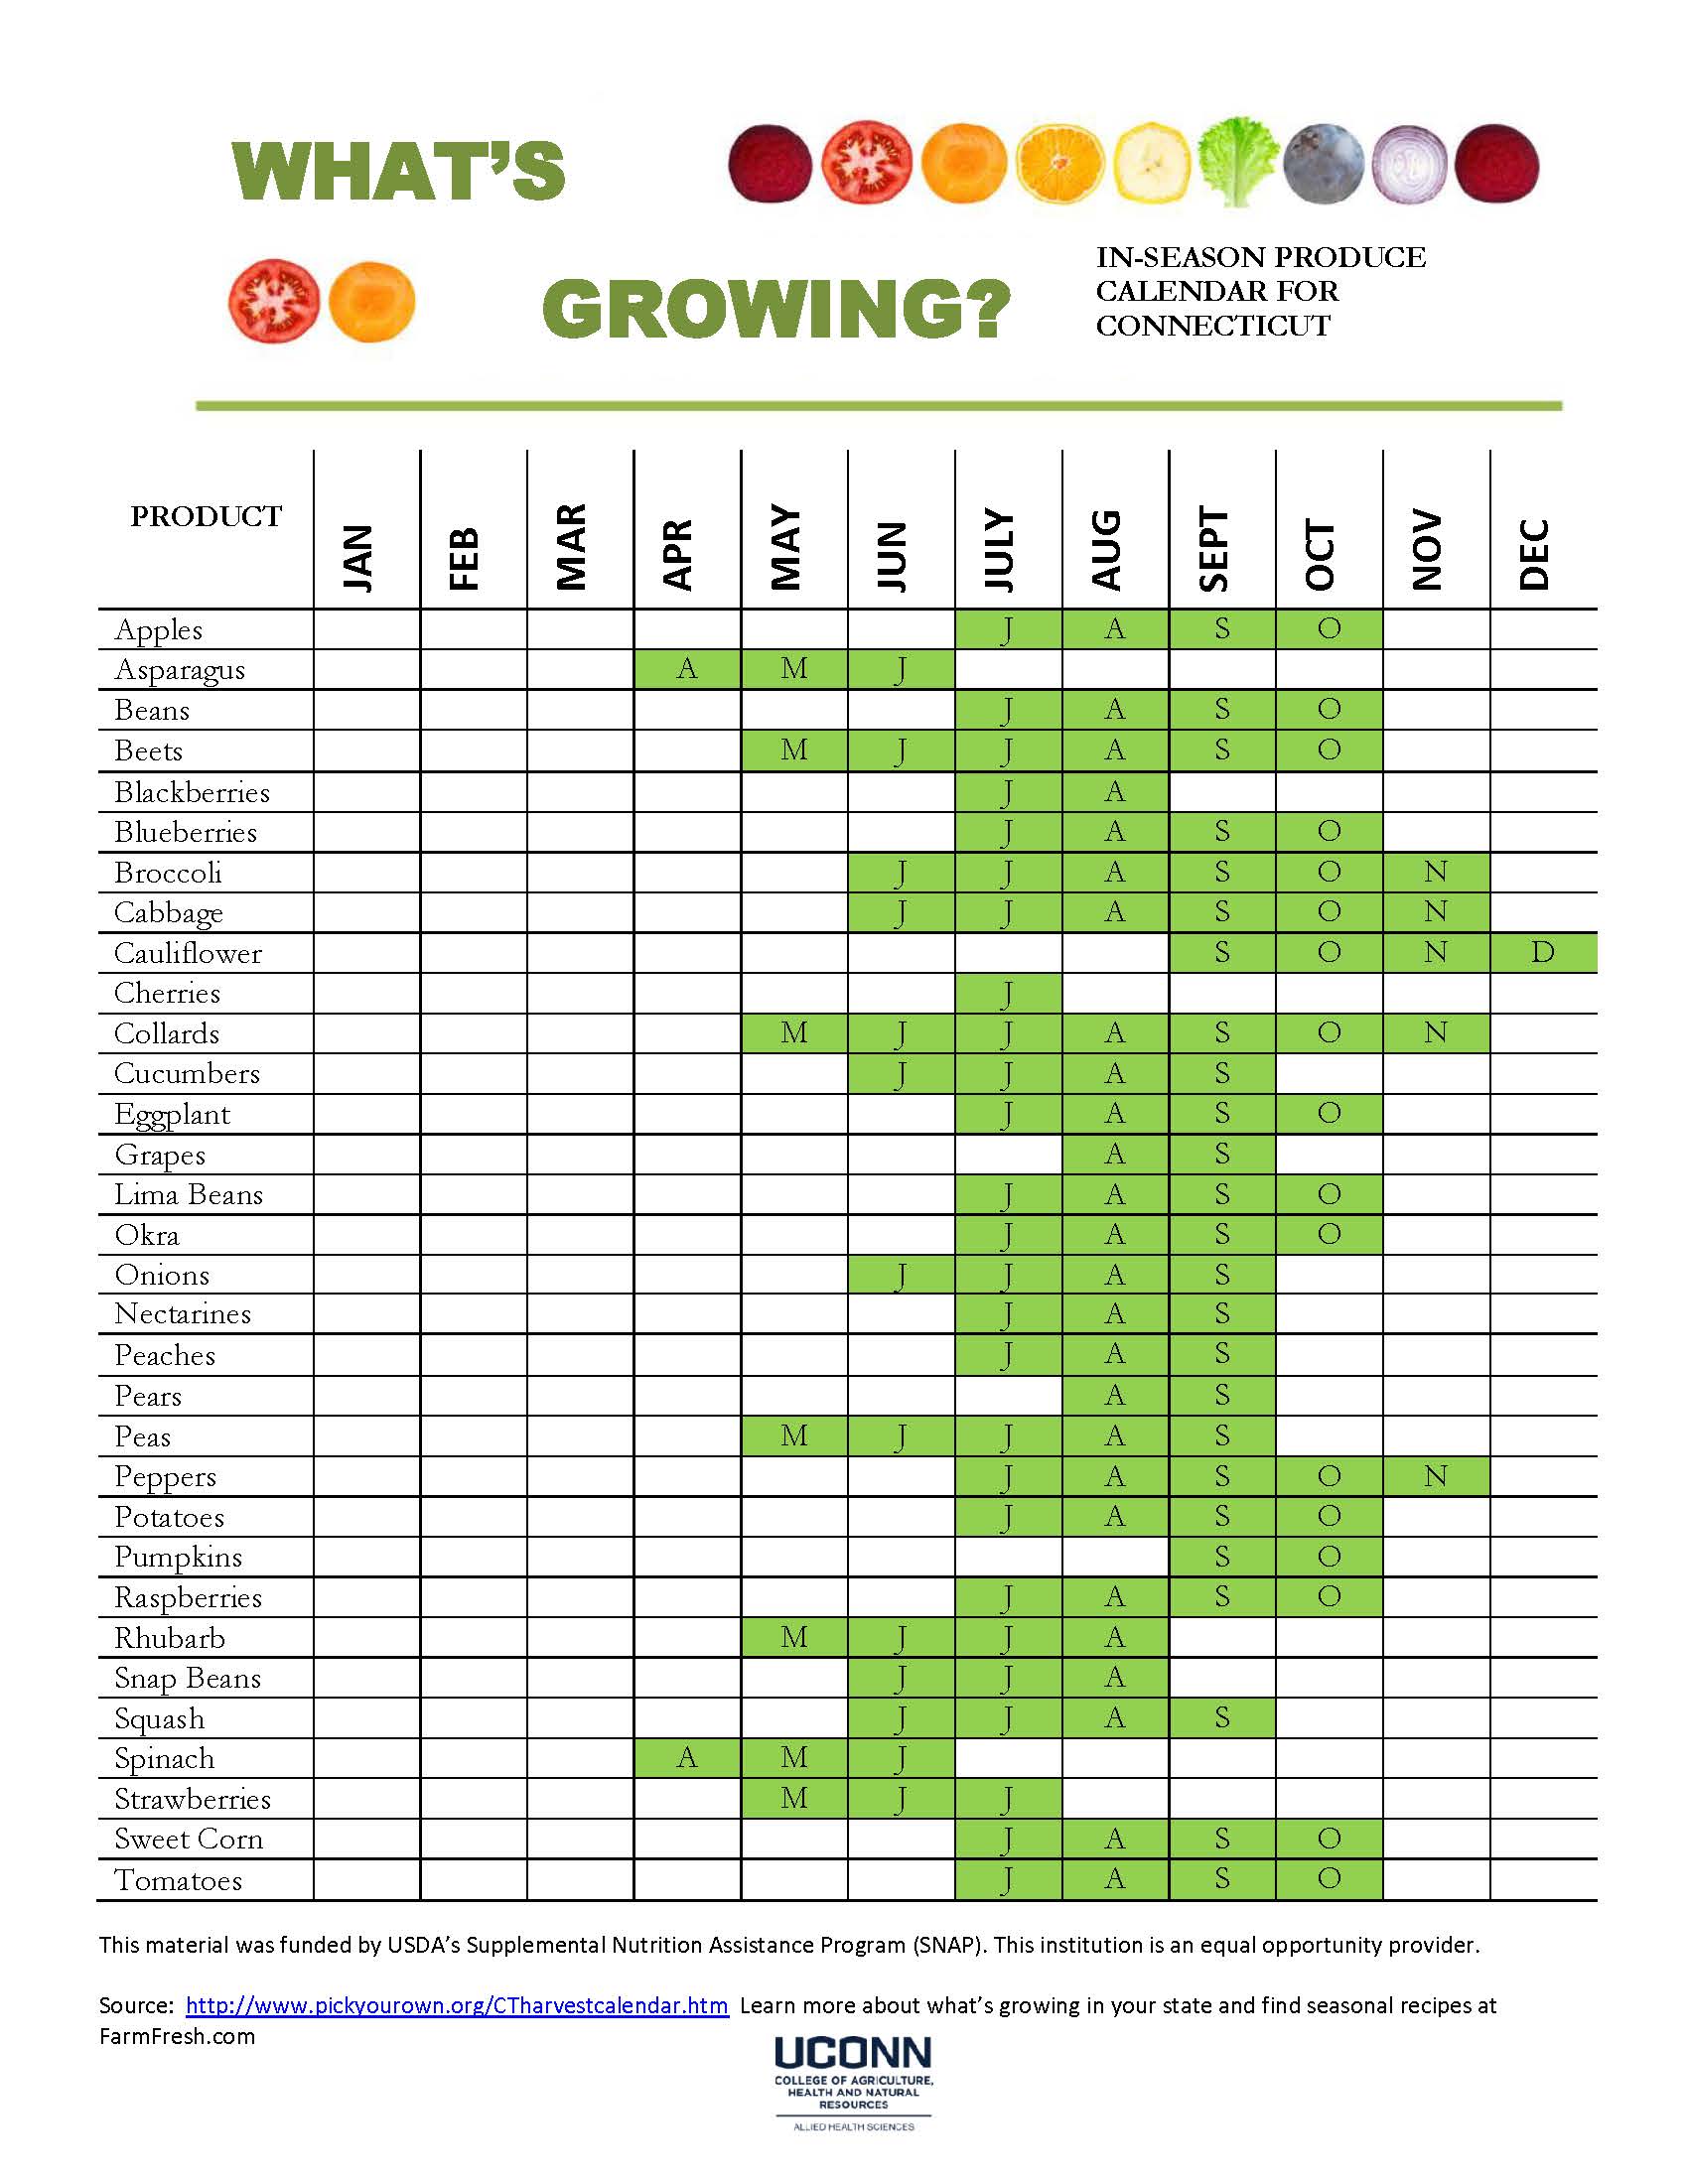 What's Grown in CT? chart